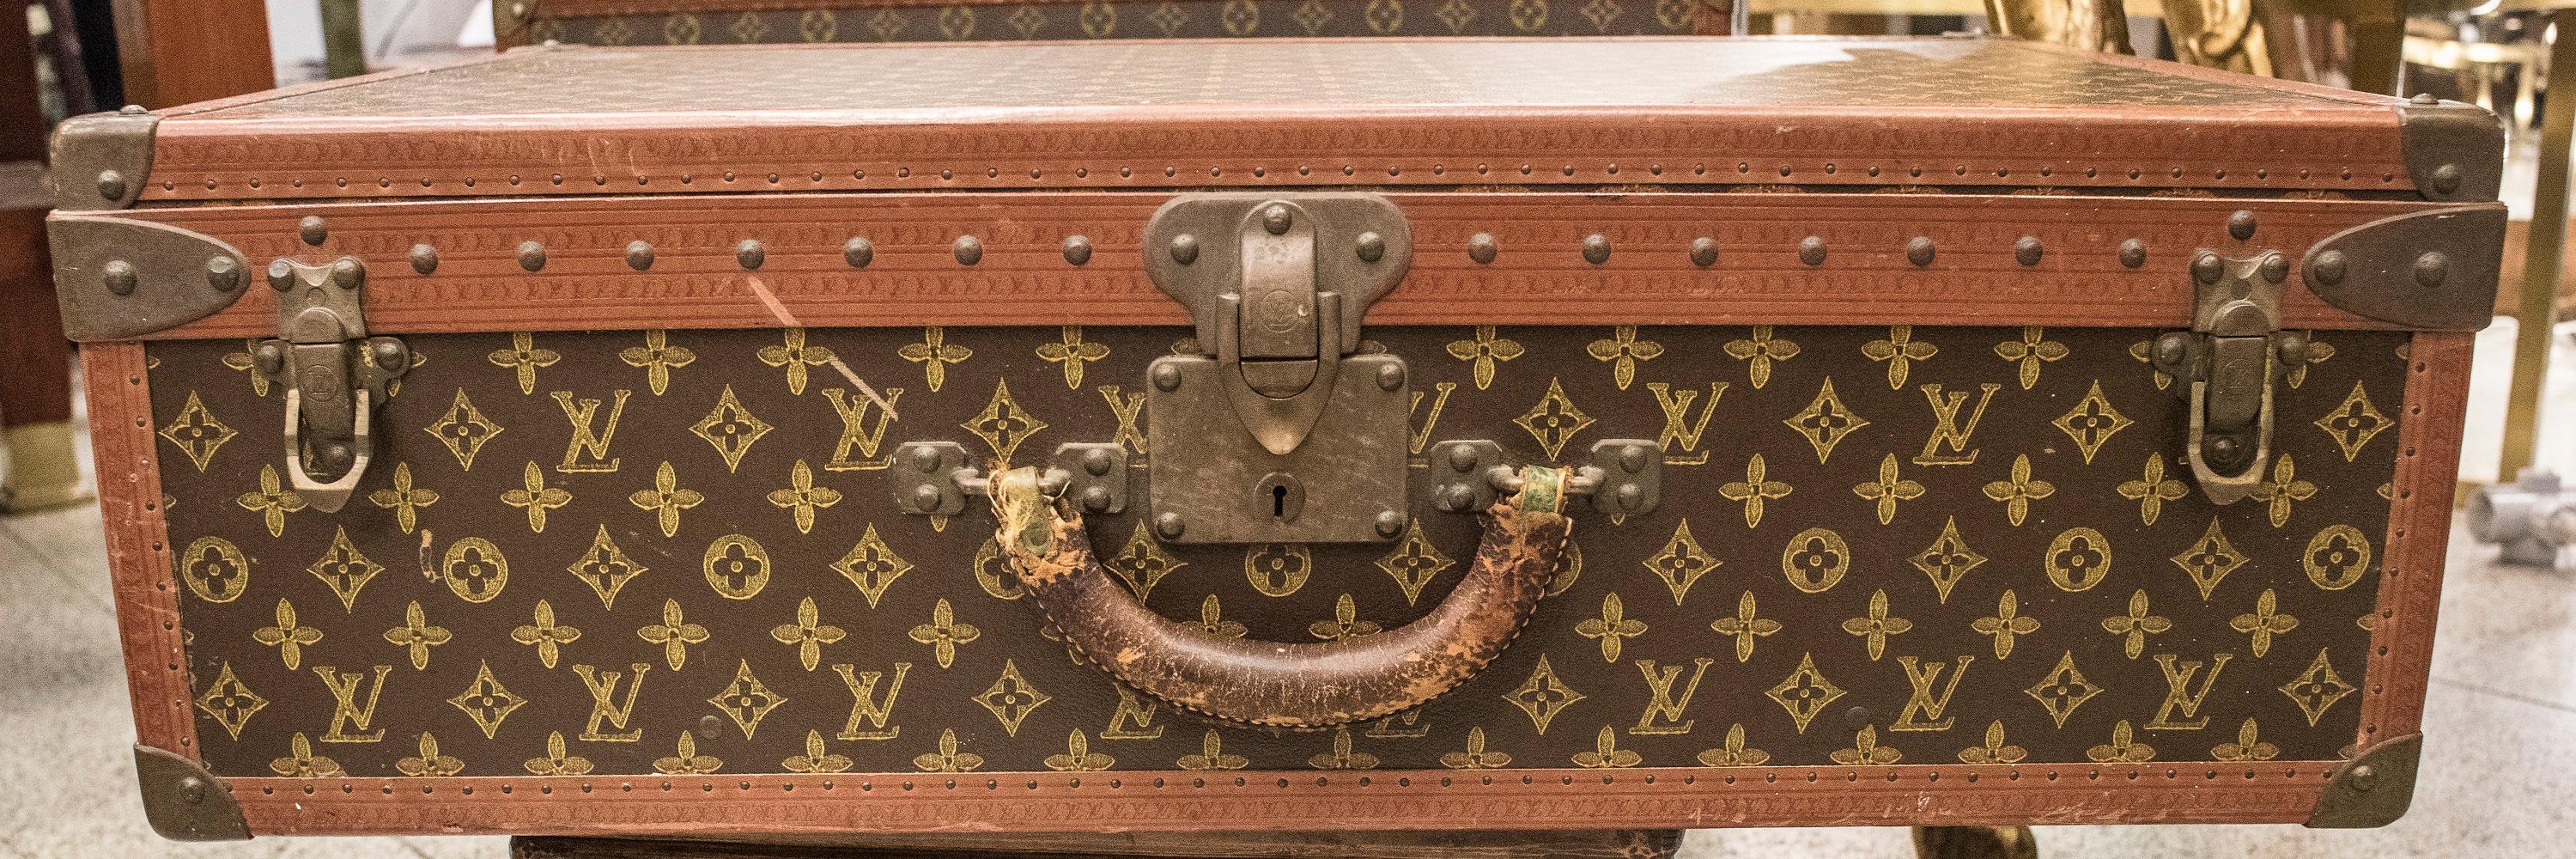 French Louis Vuitton 1945 Suitcase-Trunk Alzer '113023'